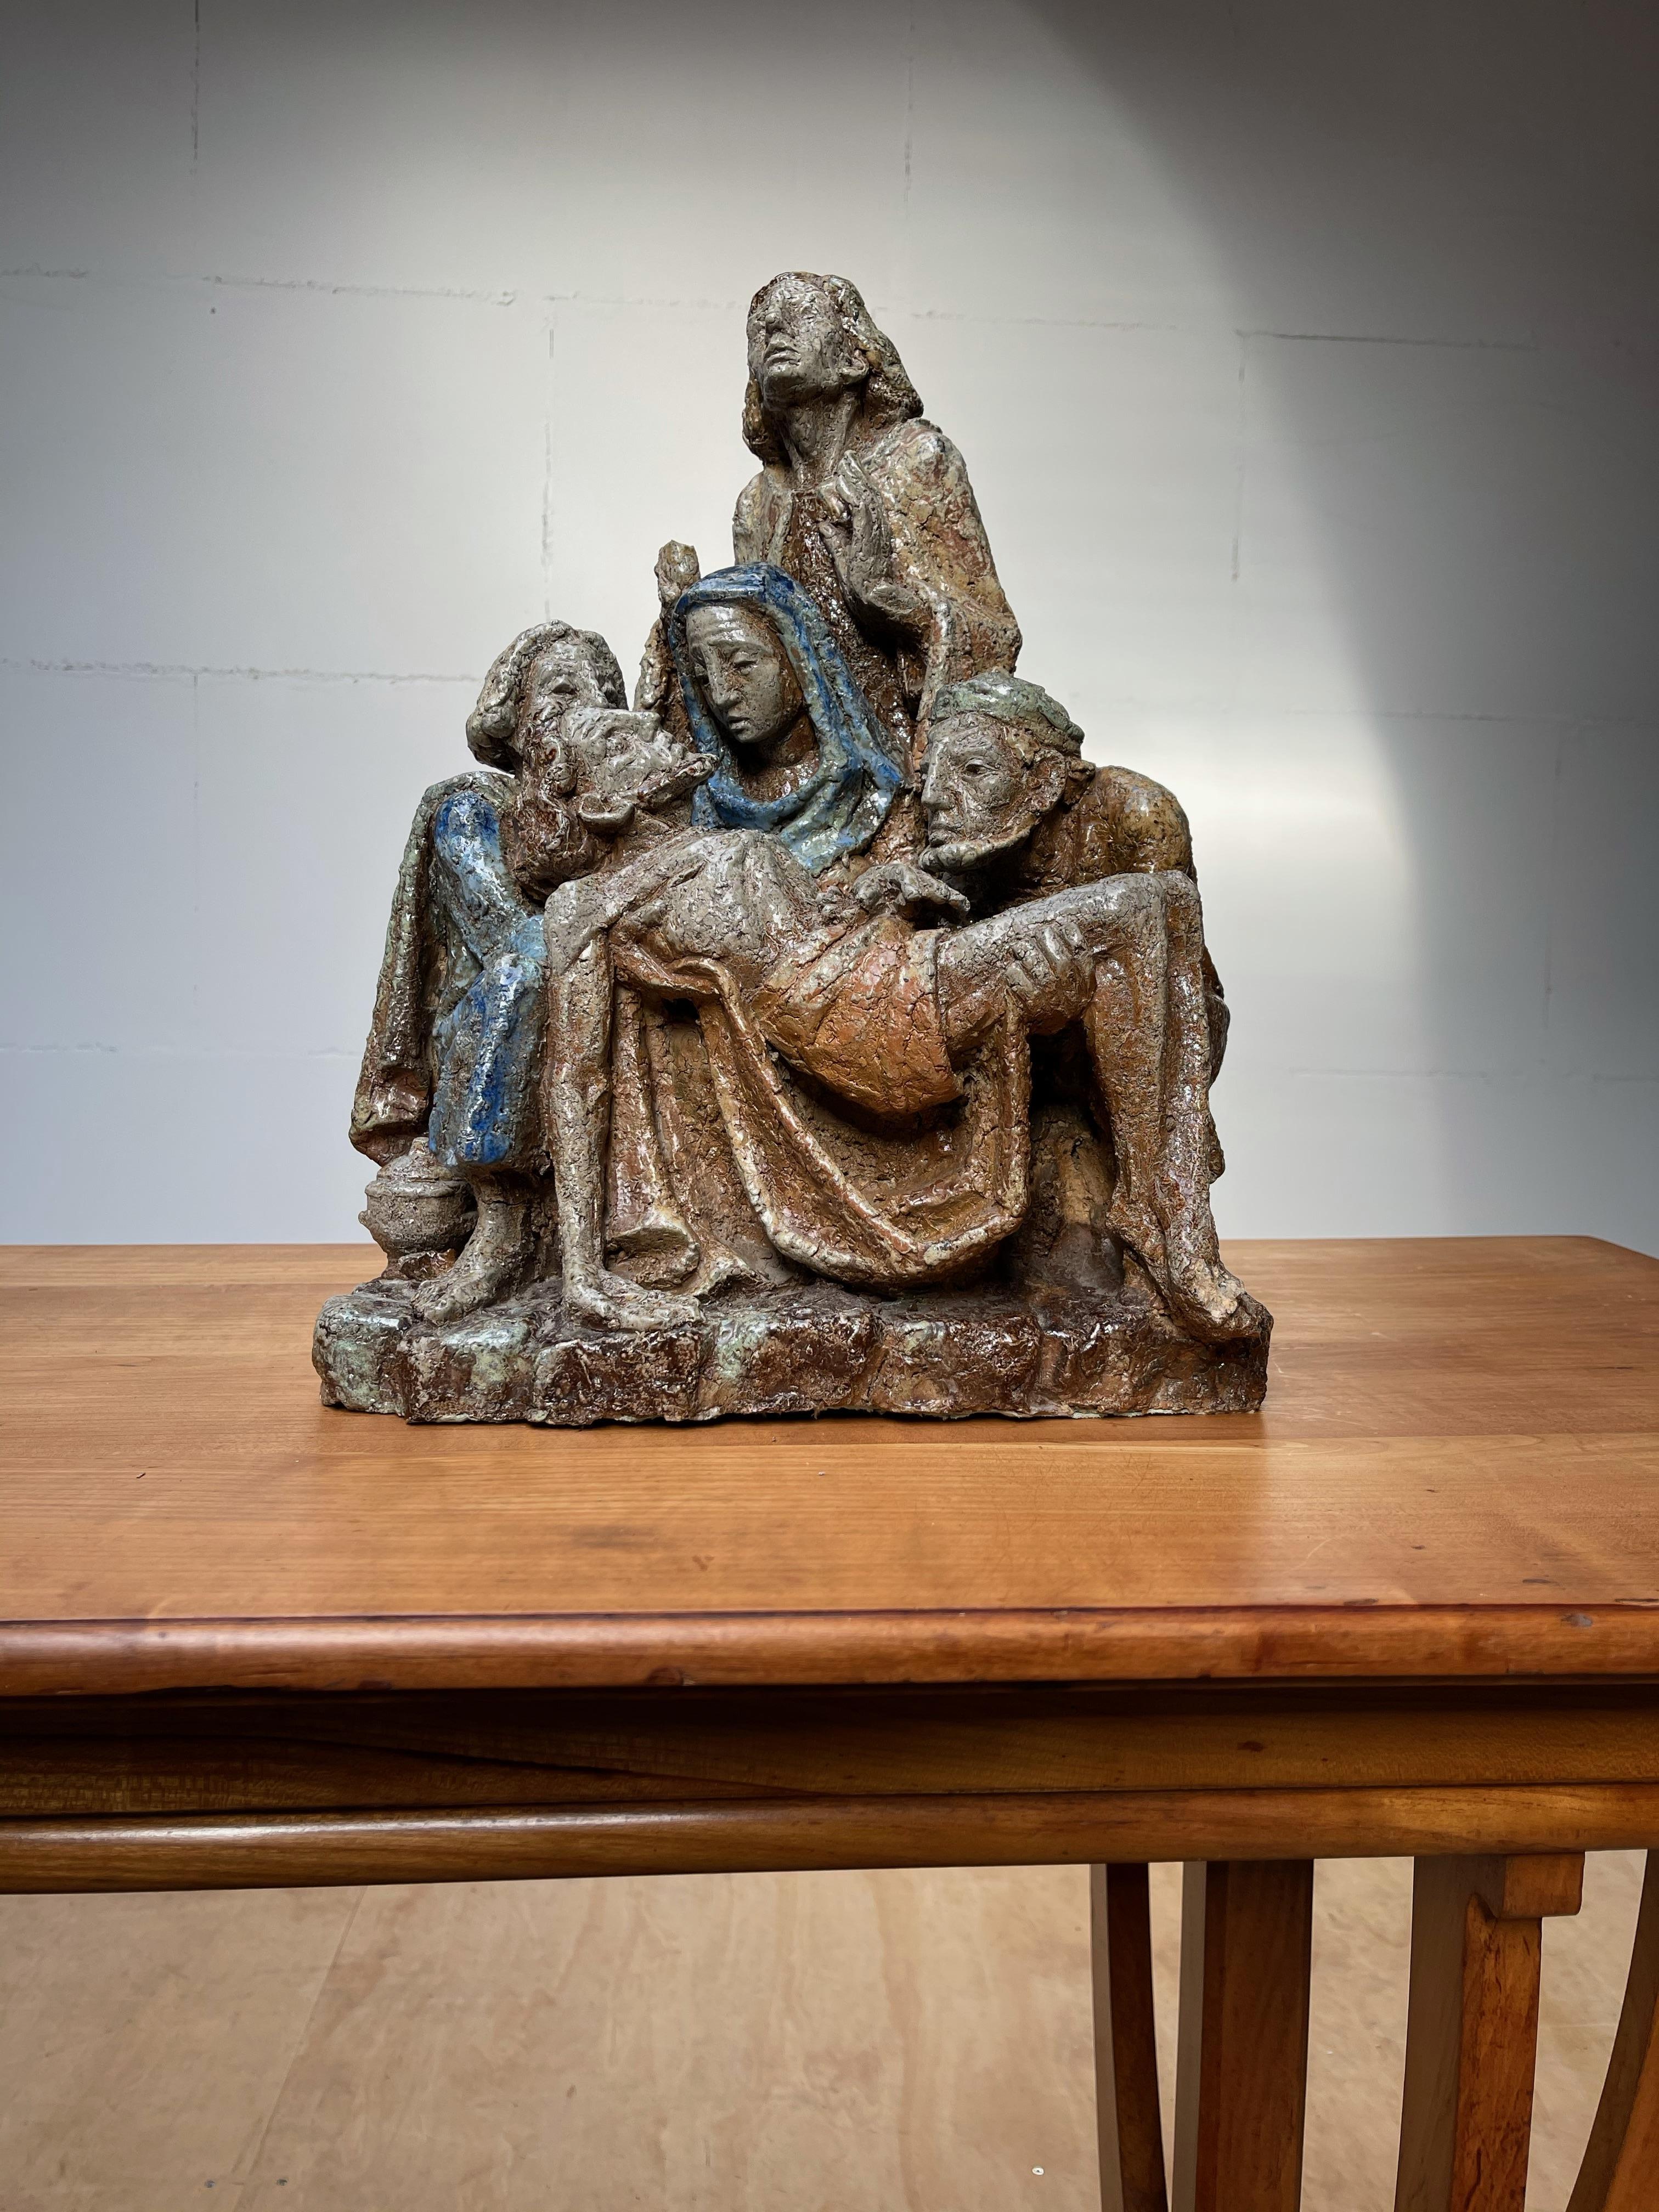 One of a kind and all handcrafted sculpture.

As many of you will know, the Pietà, depicts the body of Jesus on the lap of mother Mary after the crucifixion. Over the years we have seen this famous biblical scene portrayed in all kinds of materials,